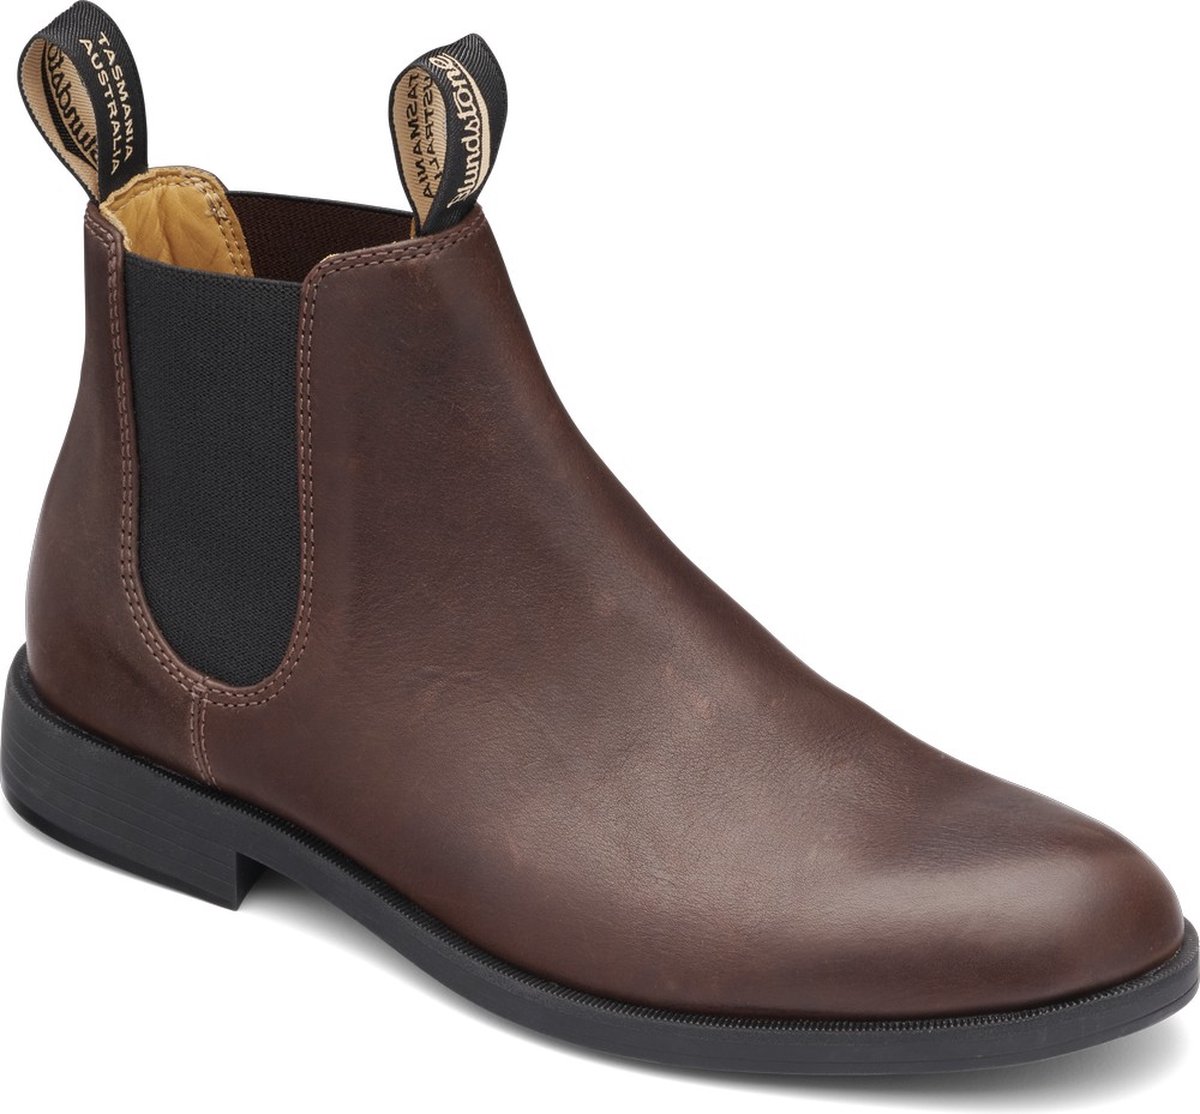 Blundstone Stiefel Boots #1900 Leather (Dress Series) Chestnut-6UK